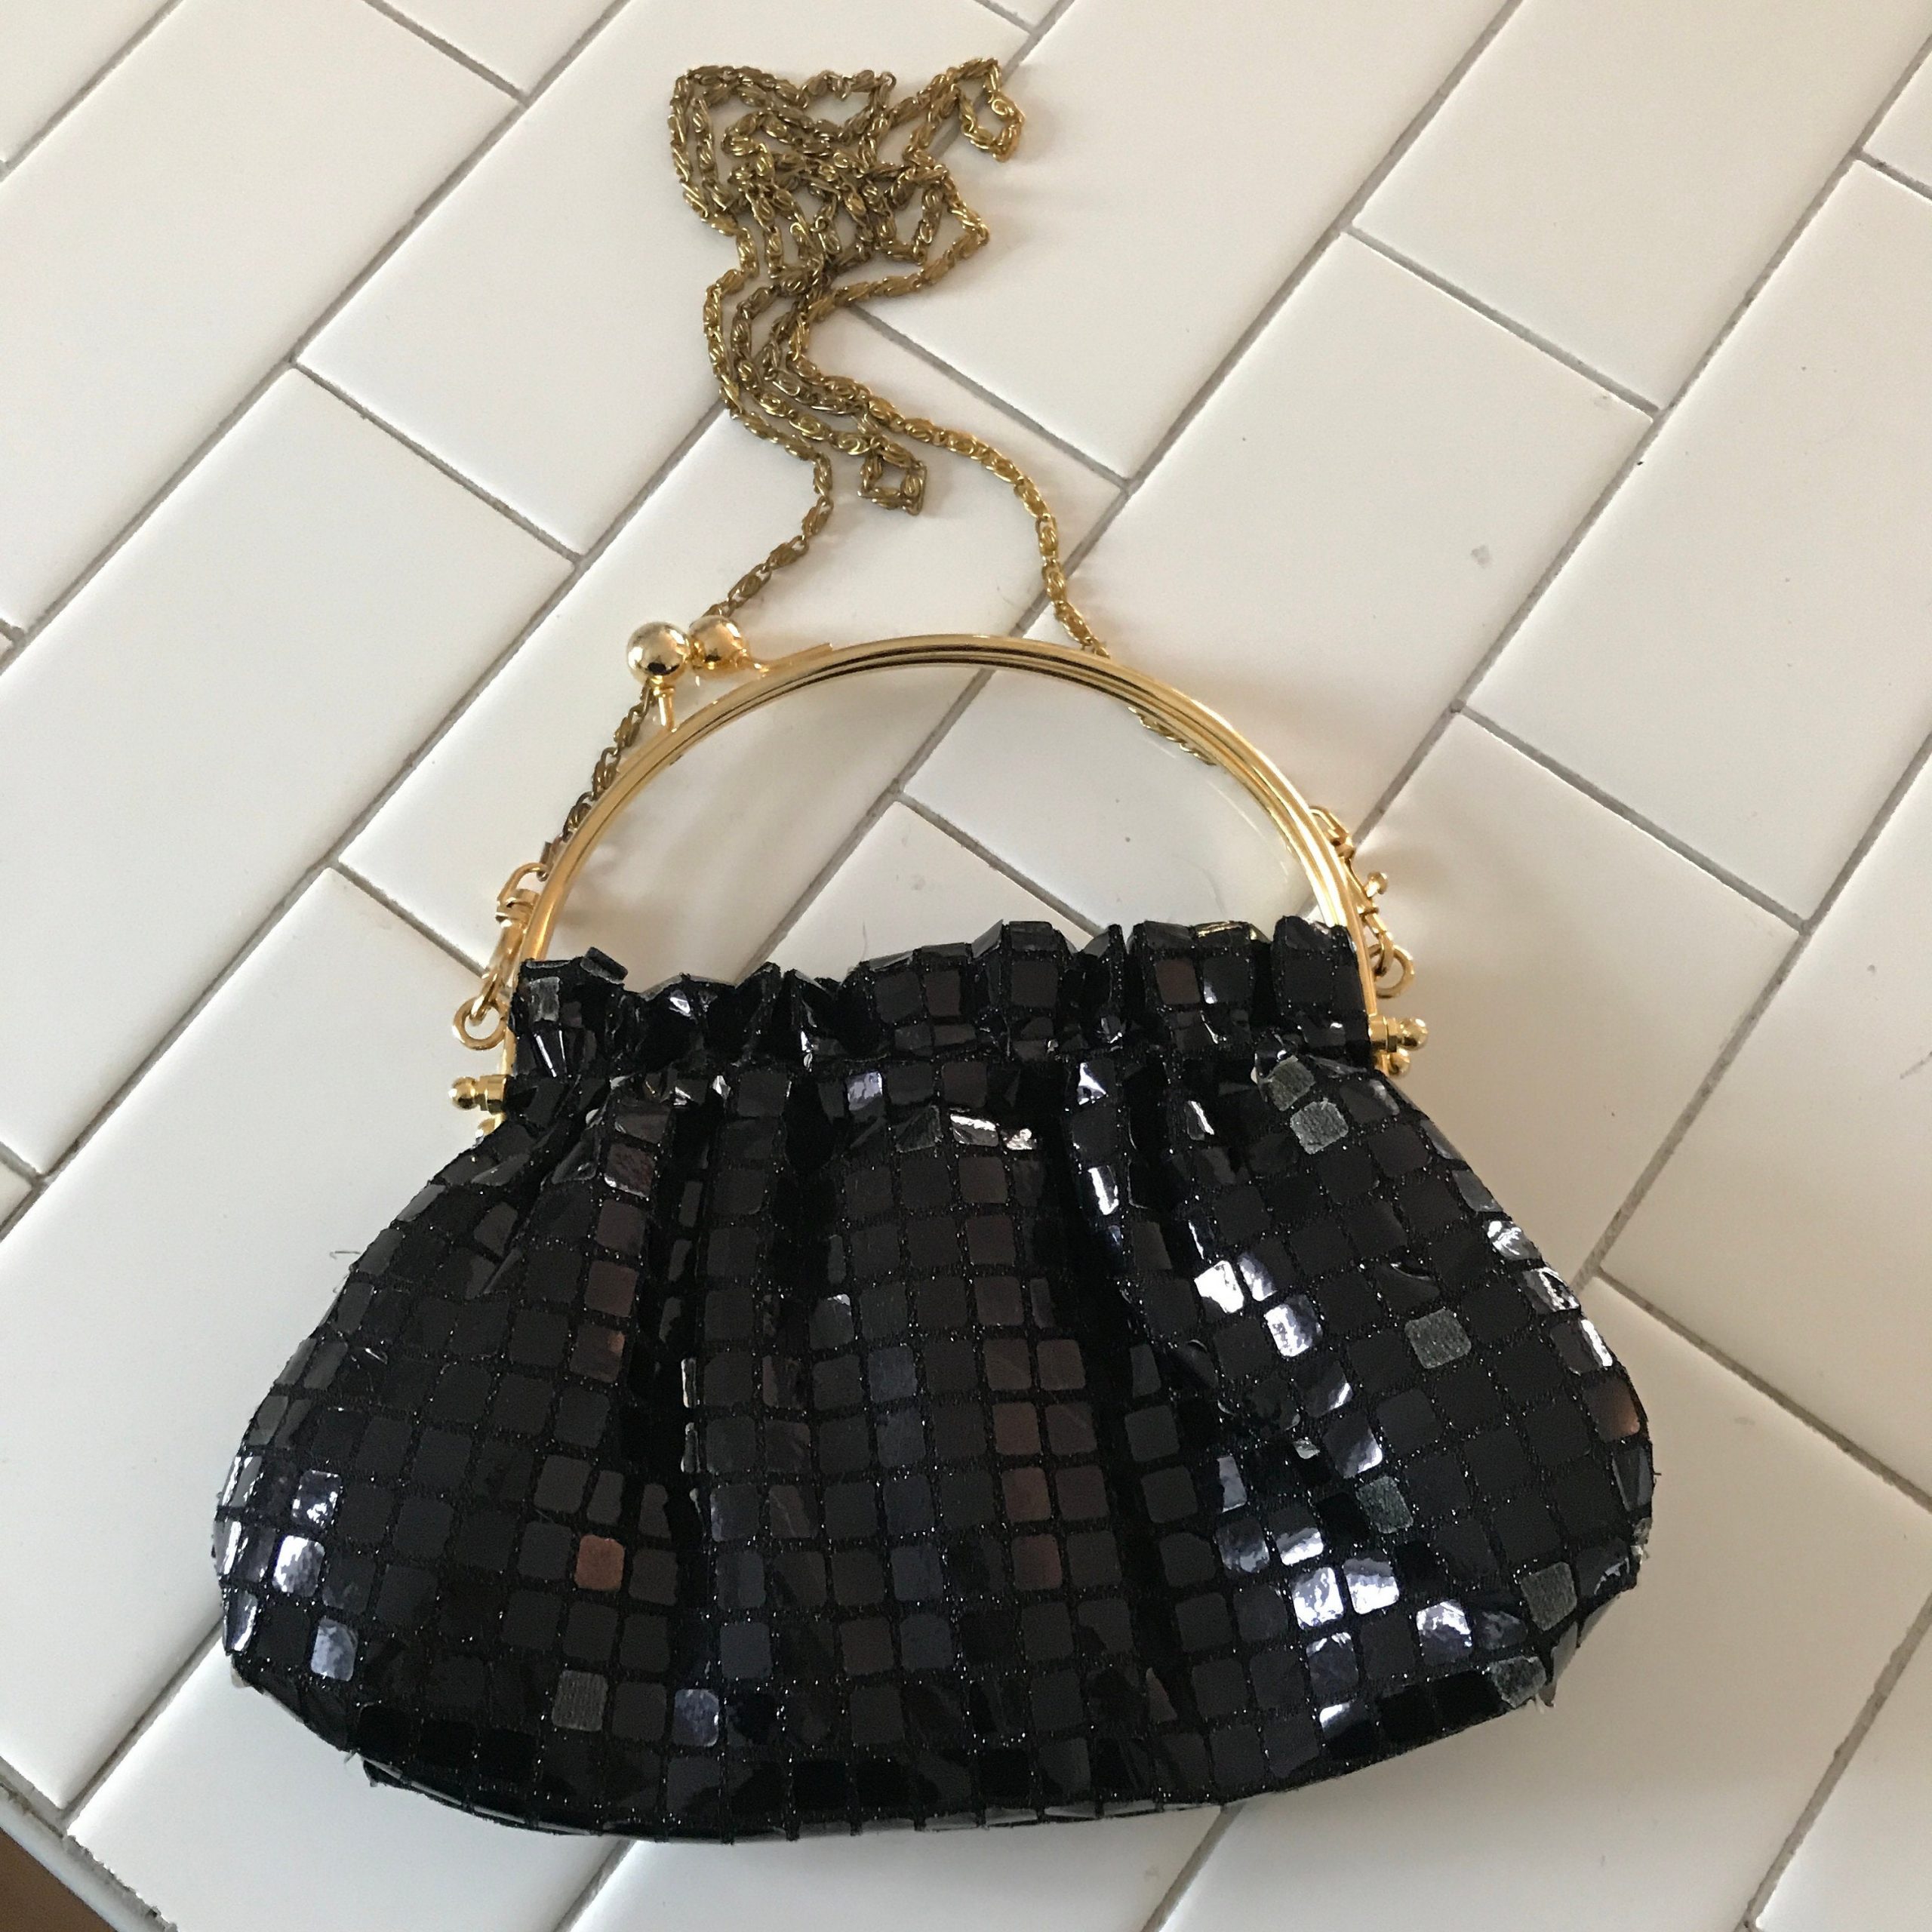 HOW TO CONCEAL A TATTERED PURSE HANDLE — KRYSTLE DESANTOS